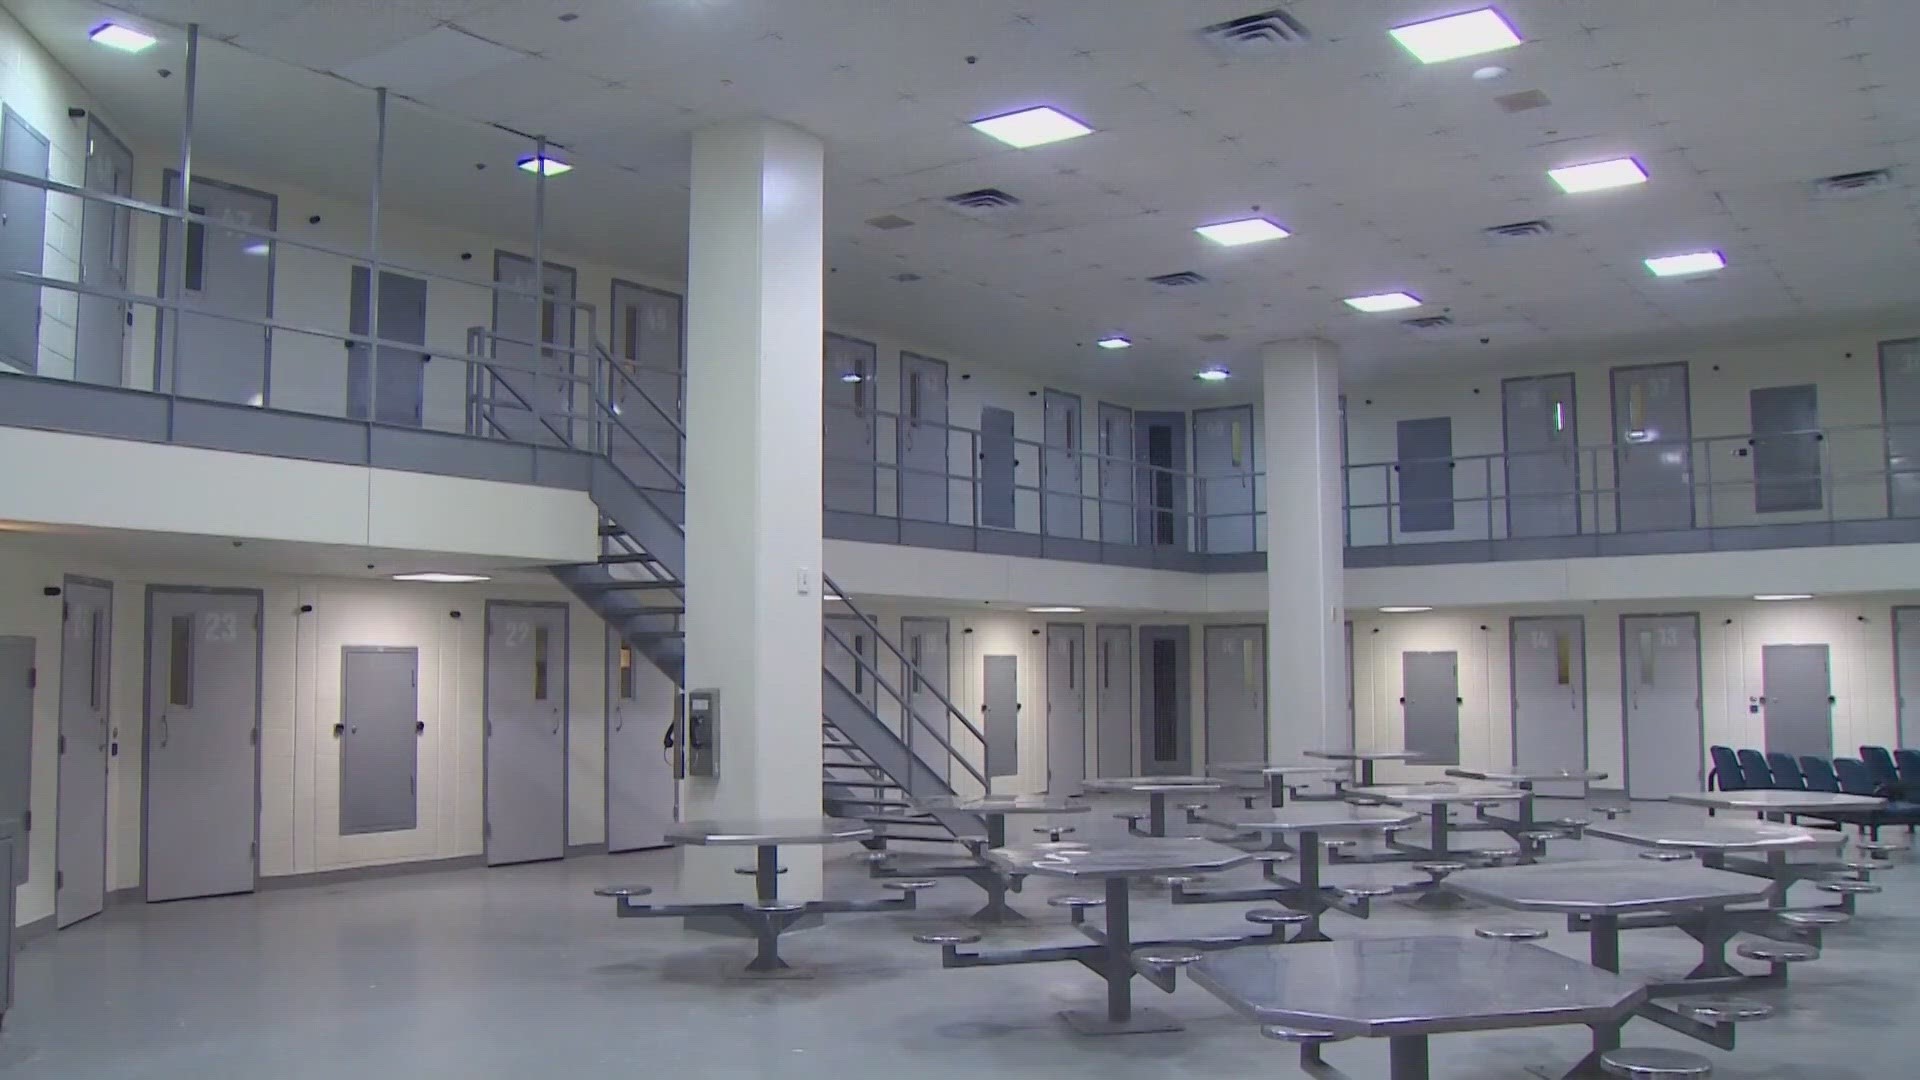 The county has used a private prison to house inmates while renovating the Tarrant County Corrections Center, but the company recently failed a state inspection.